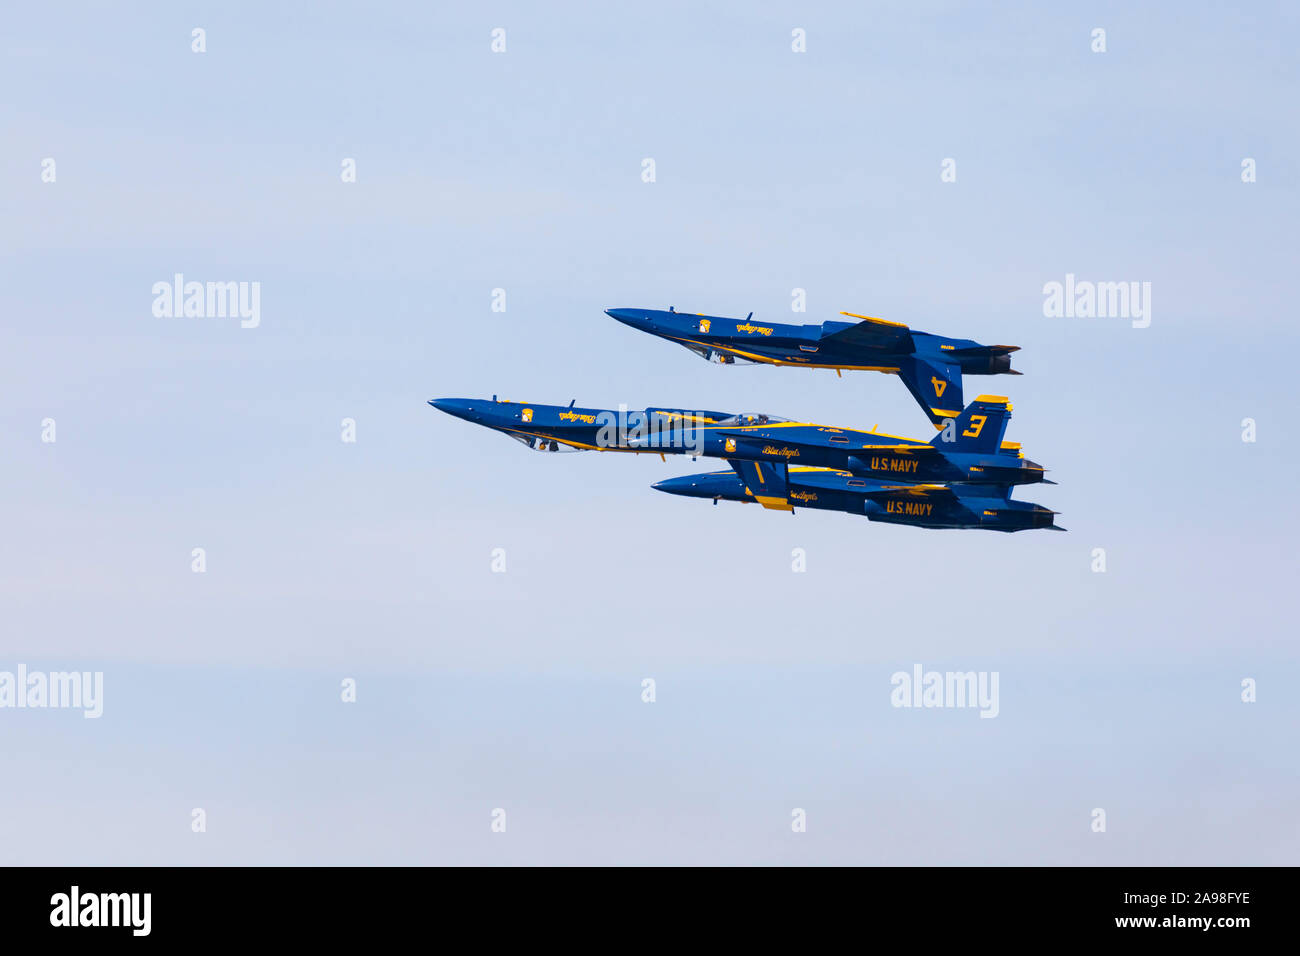 The Blue Angels aerobatic flight demonstration squadron perform over San Francisco Bay during Fleet Week 2019, California, United States of America. Stock Photo